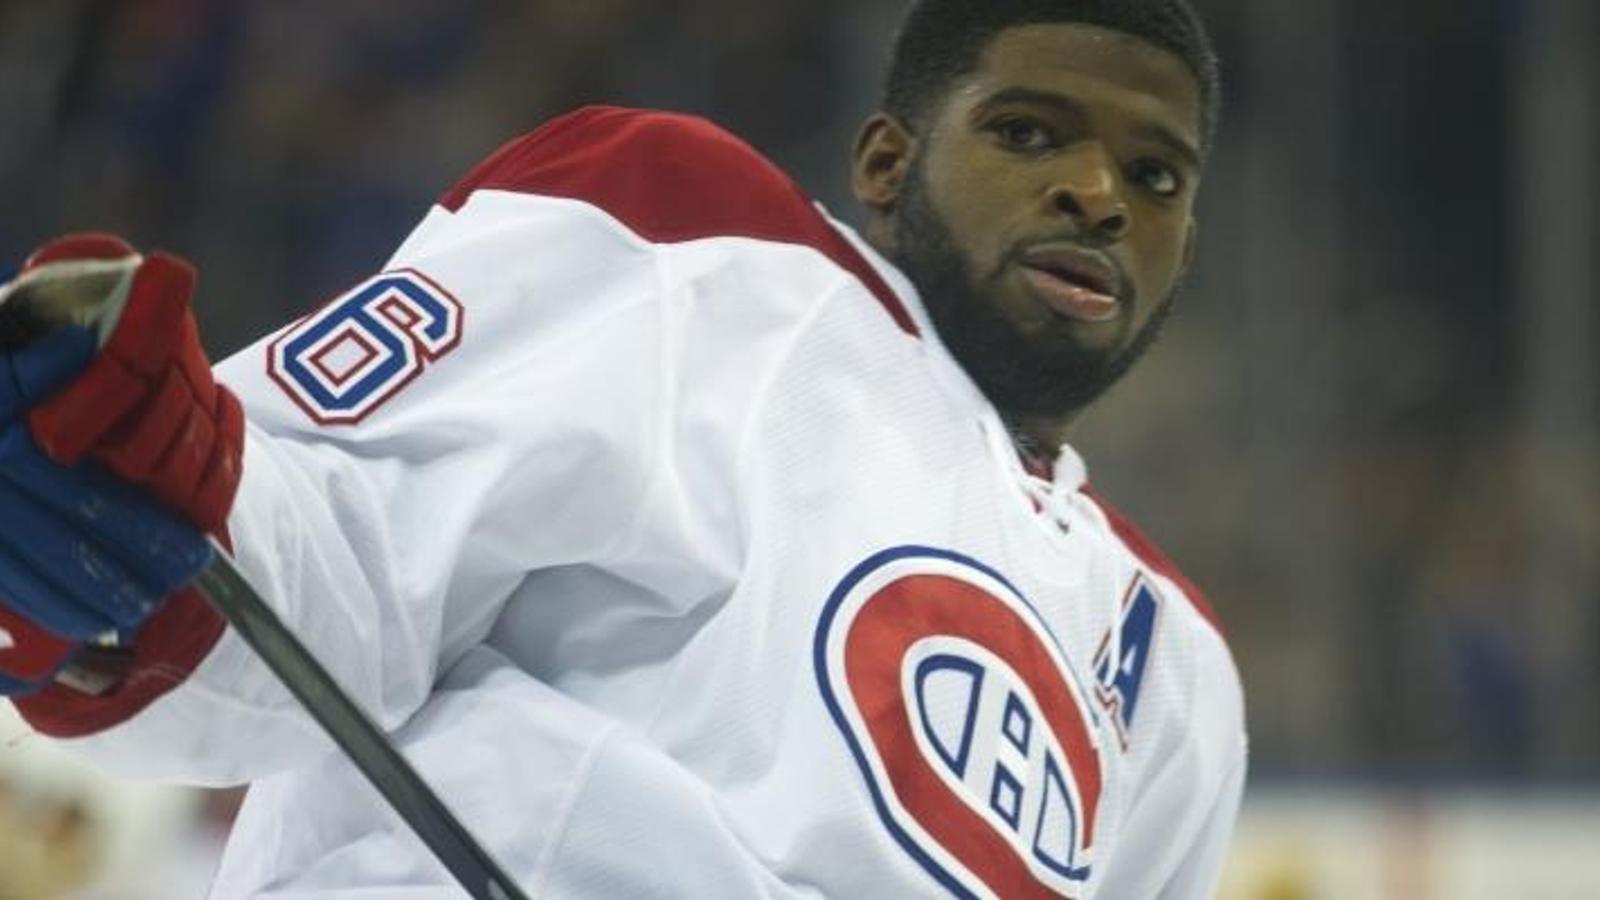 Rumor: The ugly truth about why P.K. Subban was traded may be coming out.